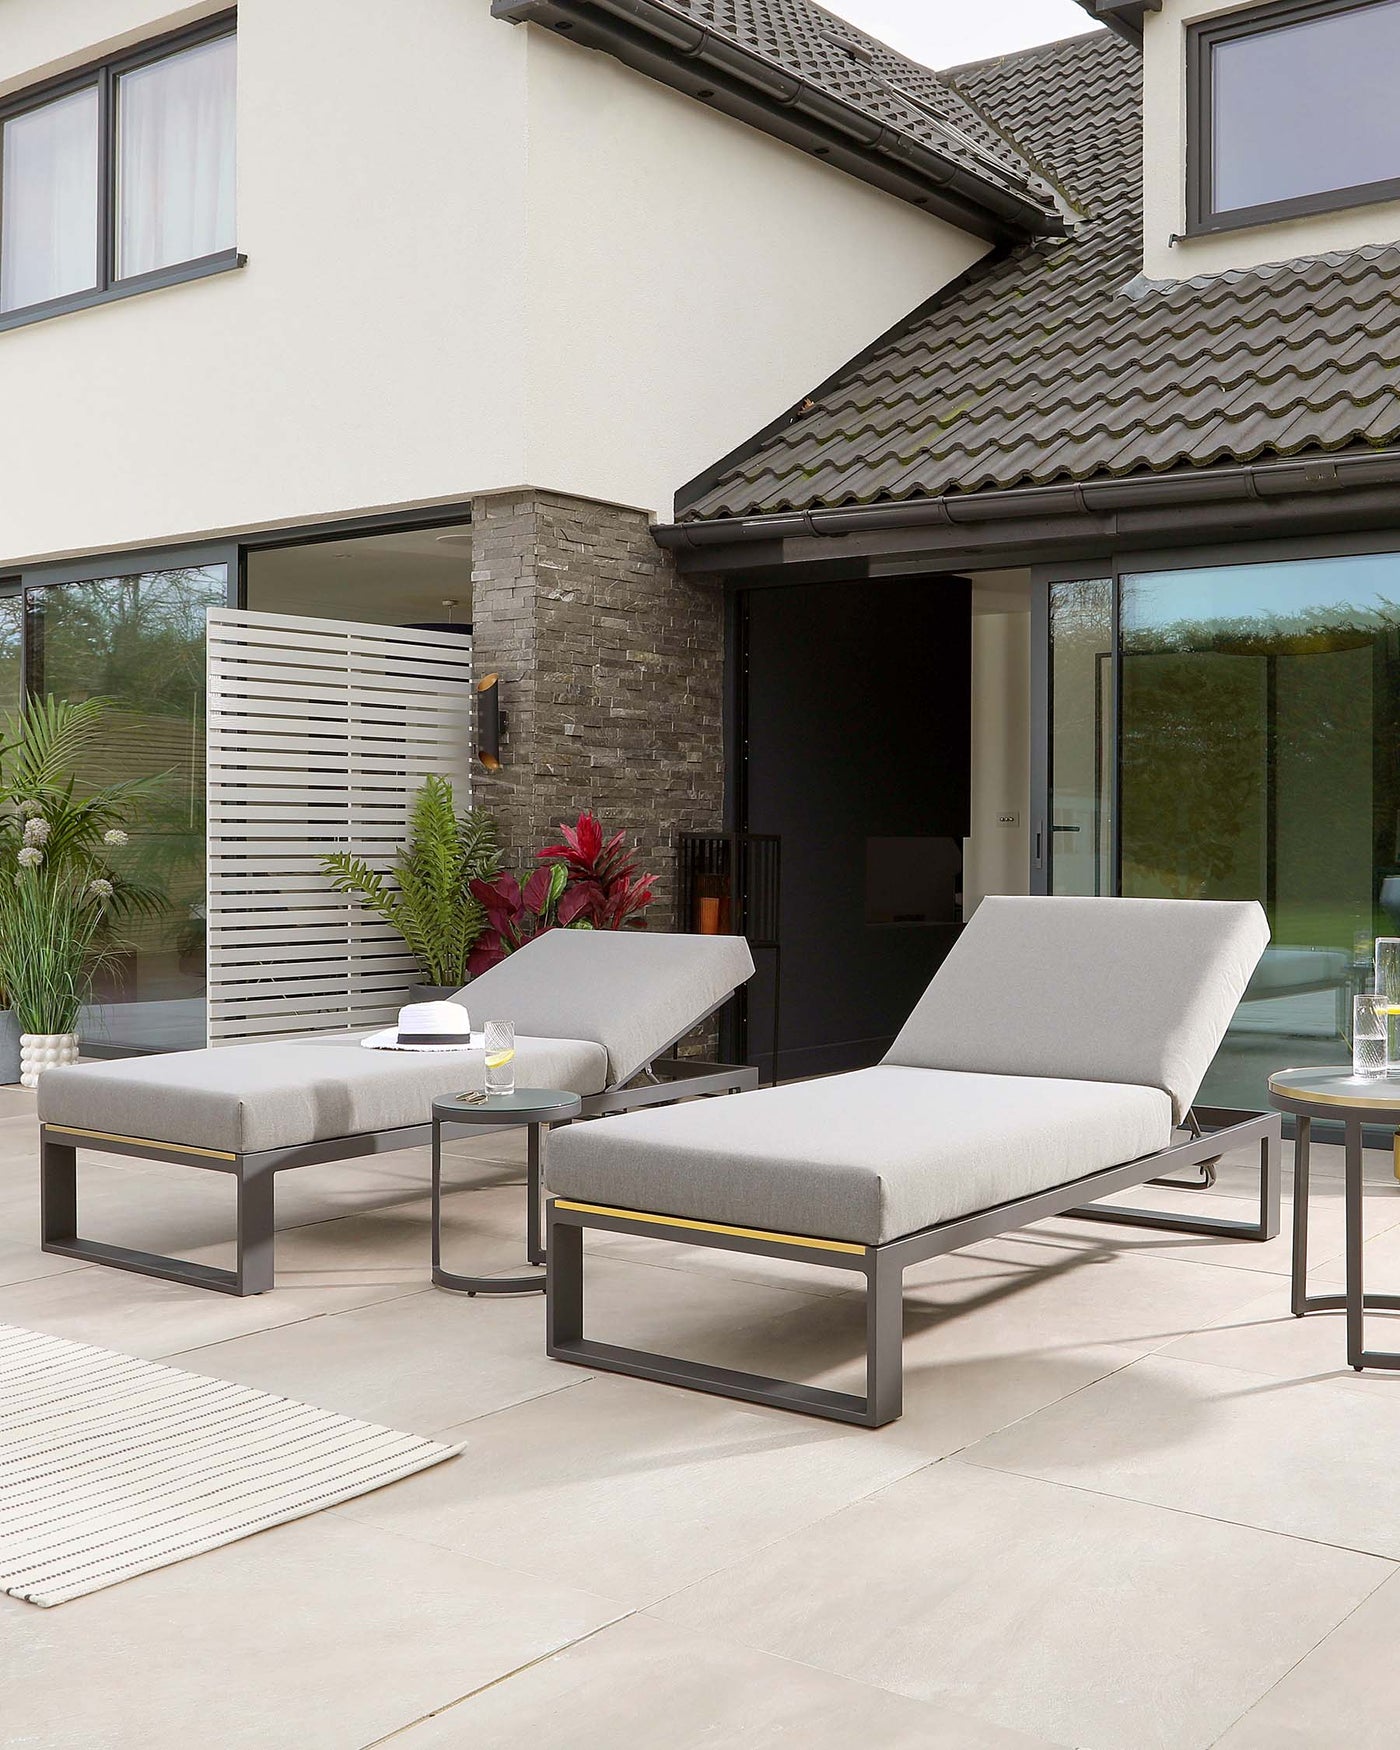 Modern outdoor furniture set featuring a pair of sleek, grey cushioned chaise lounges with matching black metal frames, accentuated with elegant gold detailing. A low, rectangular side table with a black metal frame and a glass top completes the ensemble, arranged on a paved patio area.